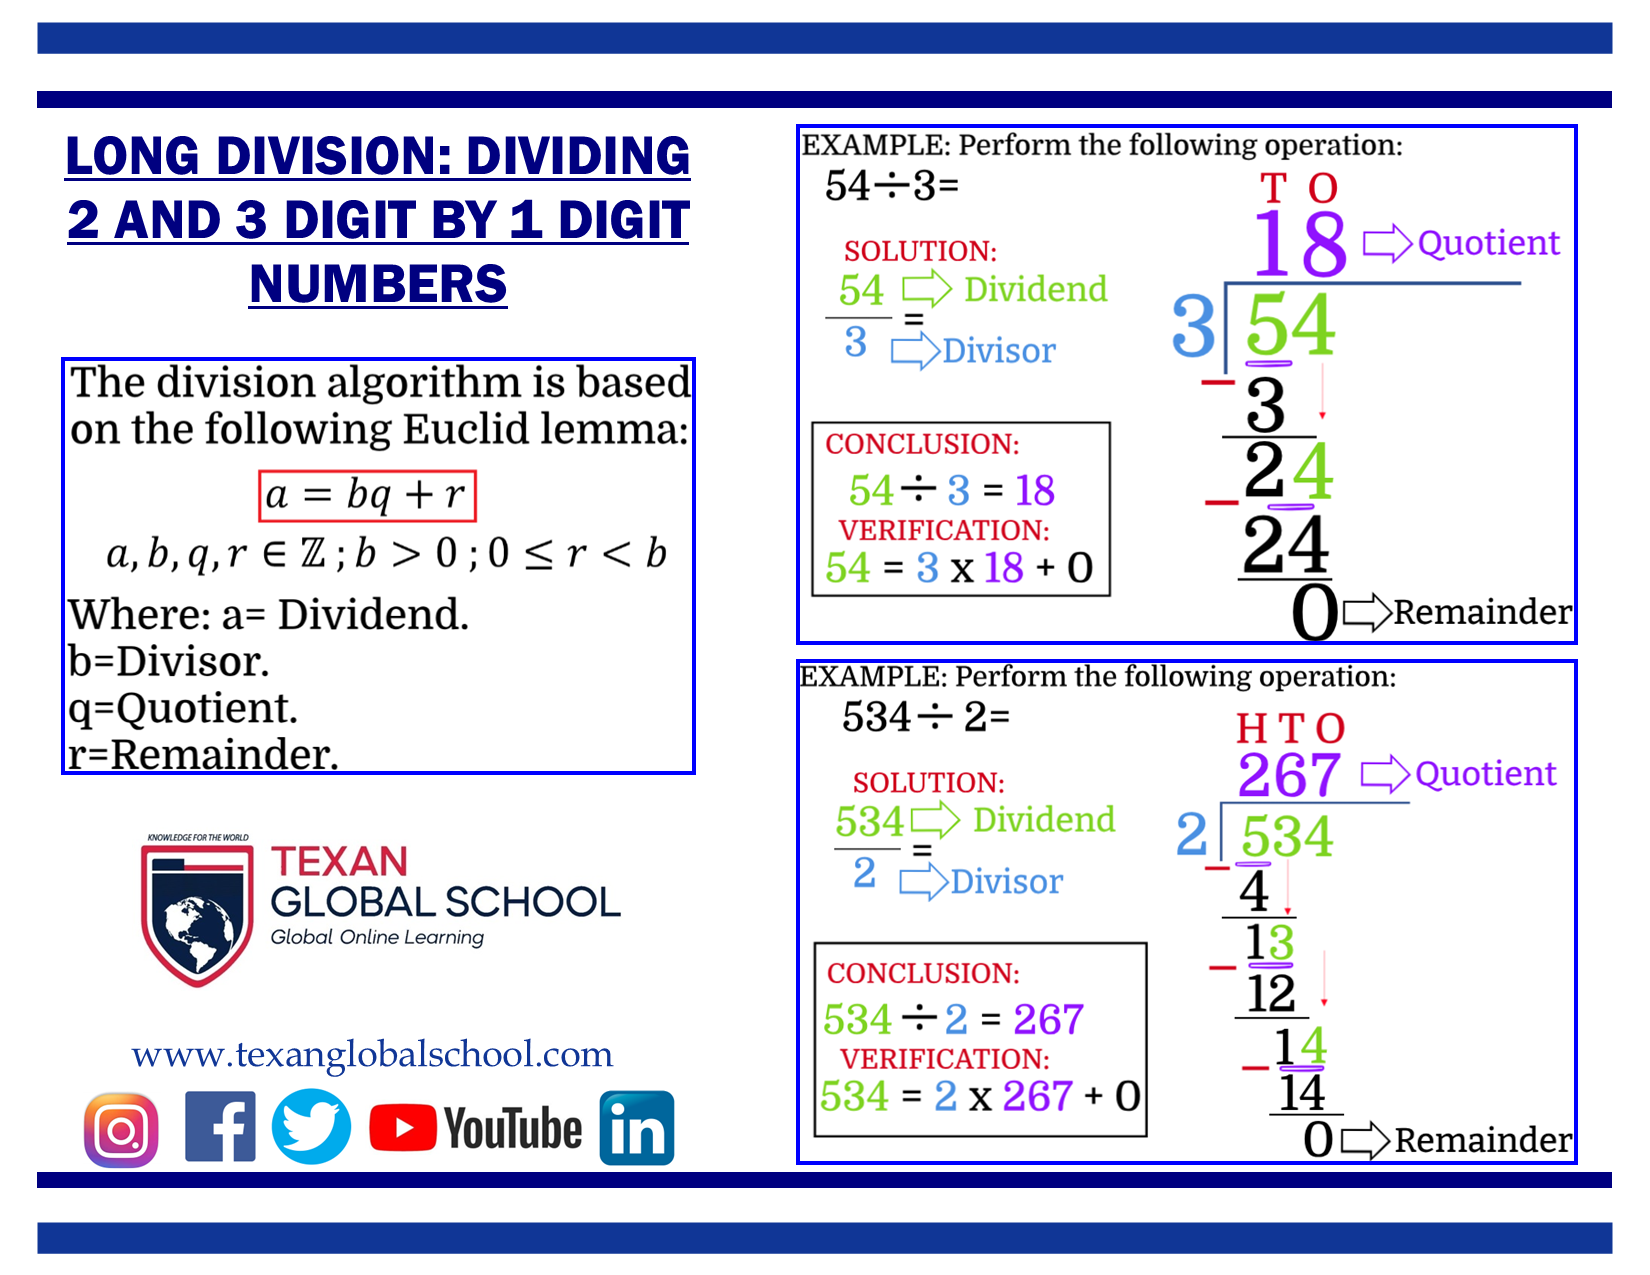 Dividing 2 and 3 Digit by 1 Digit